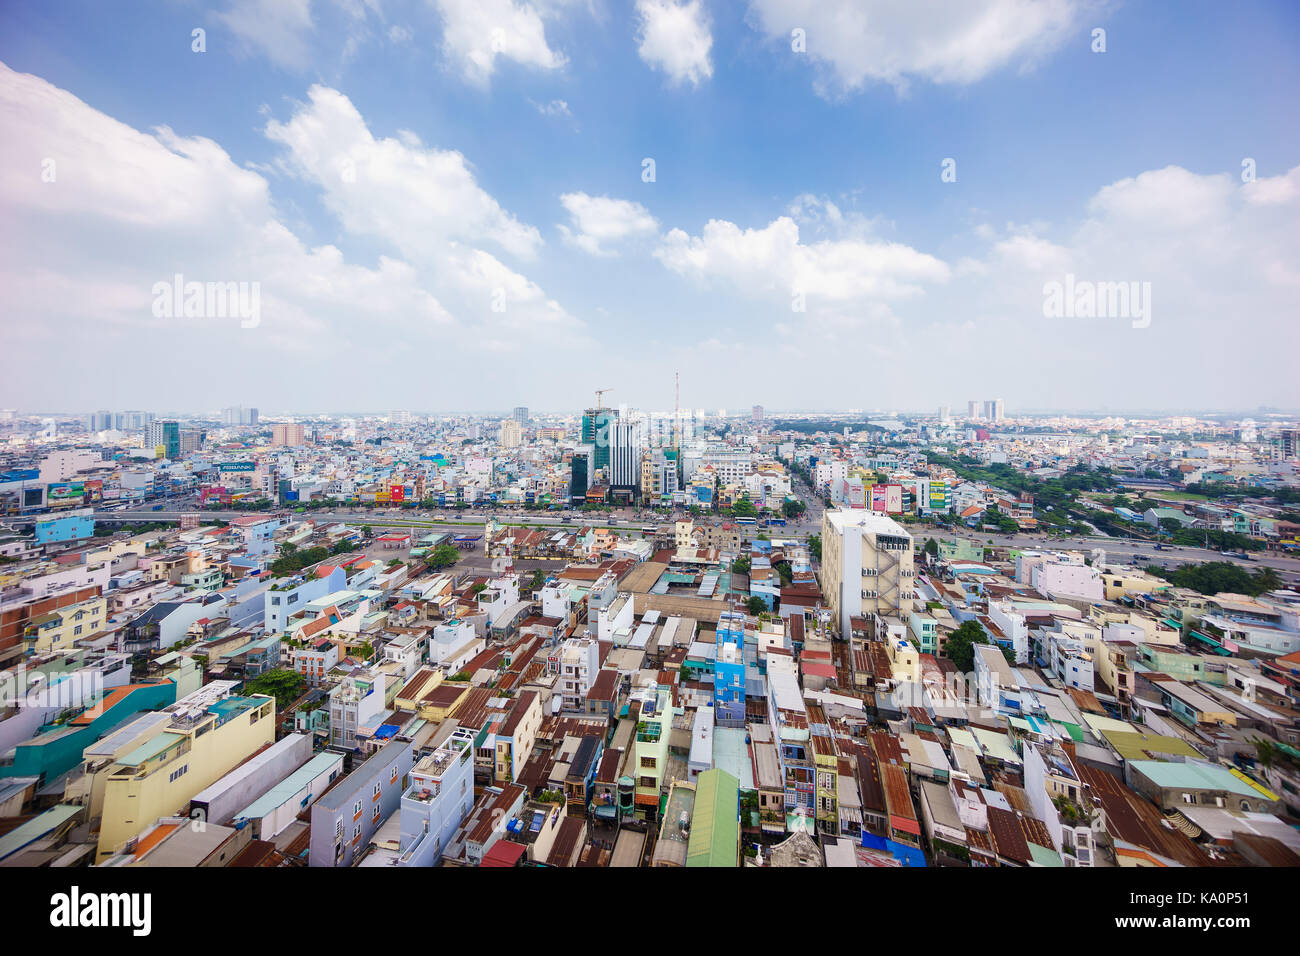 Ho Chi Minh city (or Saigon) skyline with colorful house, Vietnam. Saigon is the biggest city and economic center in Vietnam Stock Photo